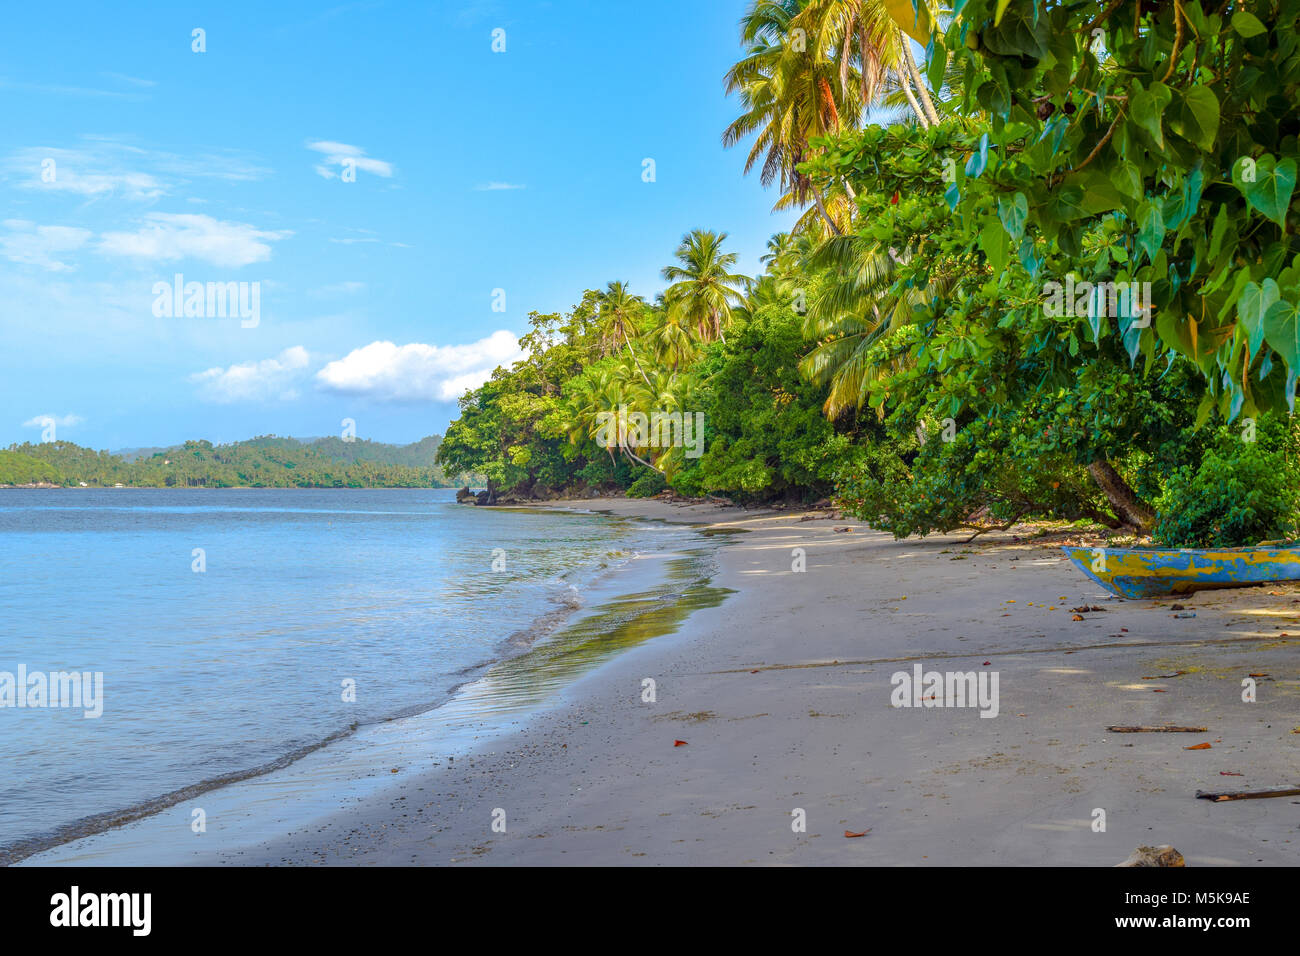 Palms and an old boat, sandy beach, Dominican Republic, caribbean sea Stock Photo